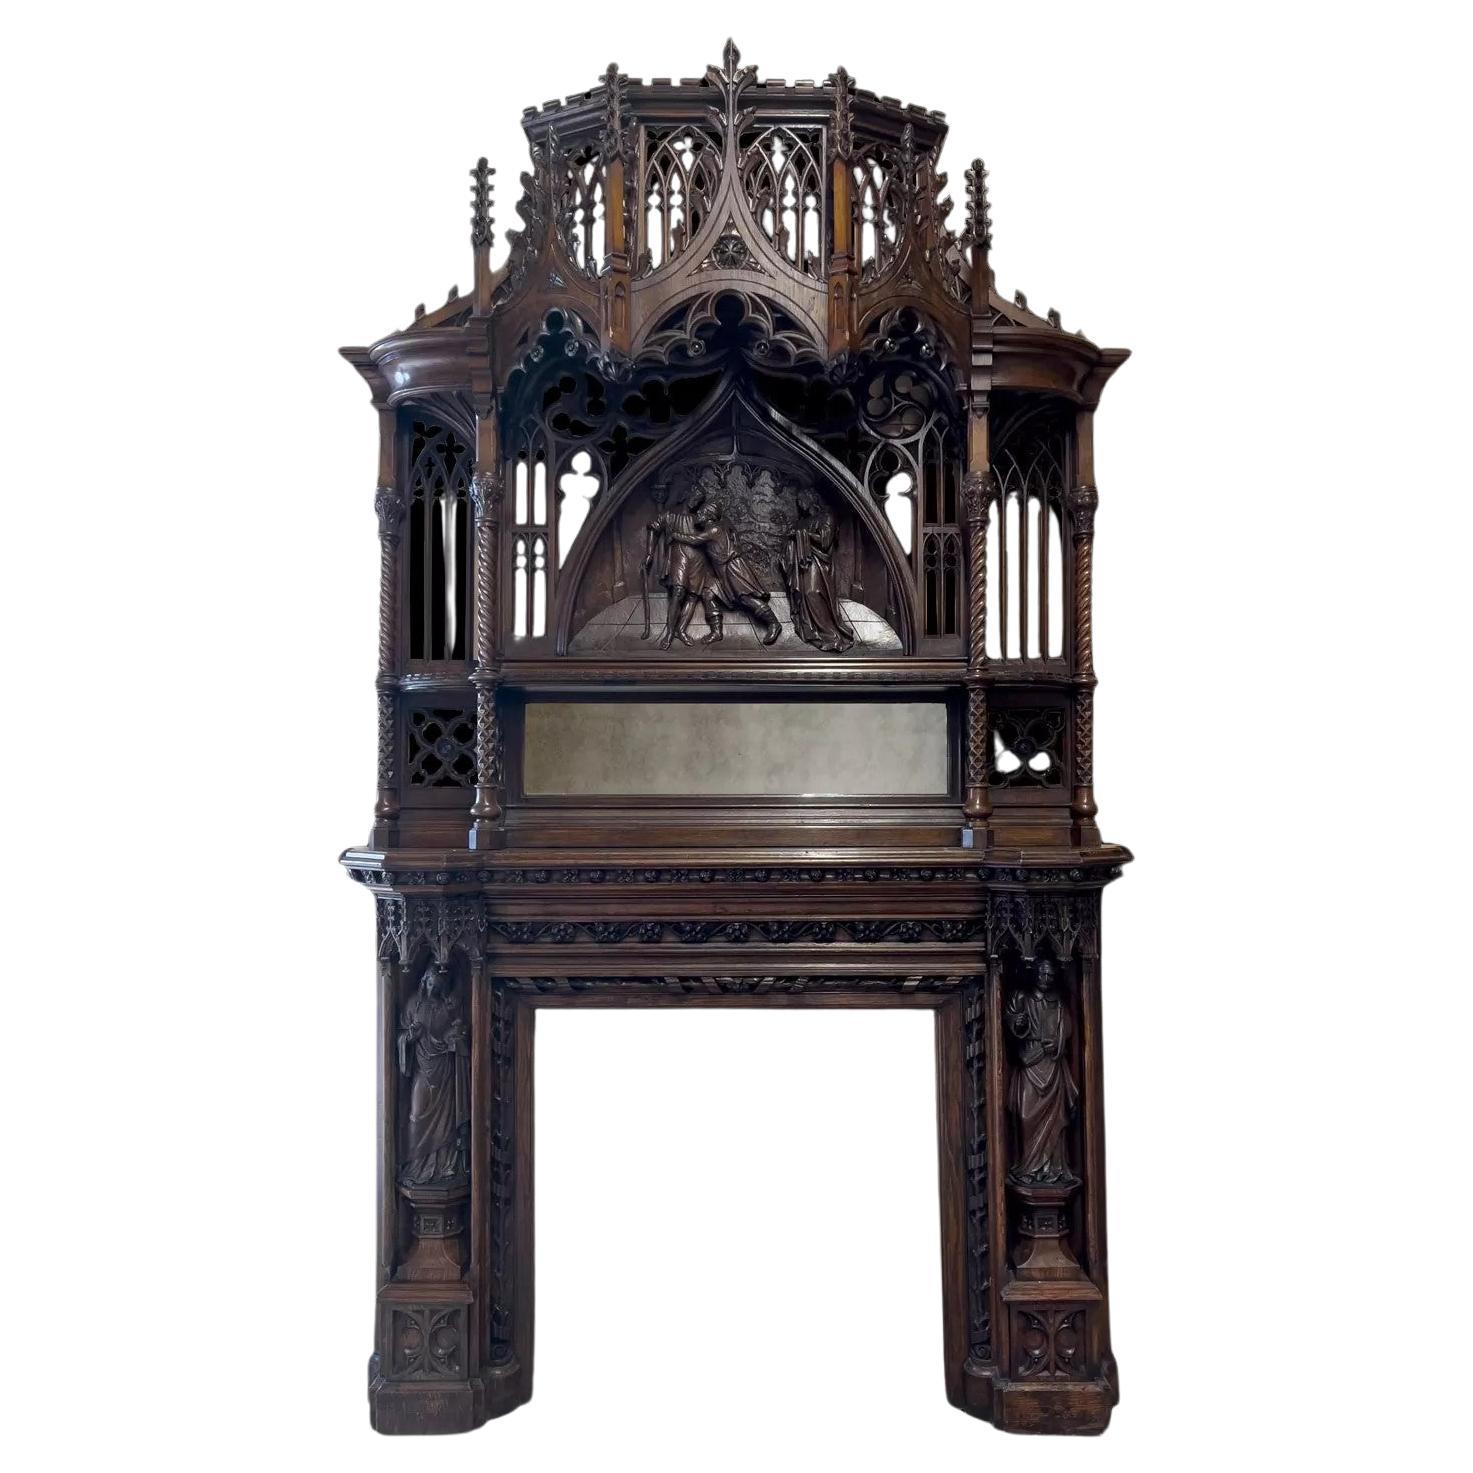 A magnificent antique English 19th century Gothic Revival carved oak mantel For Sale